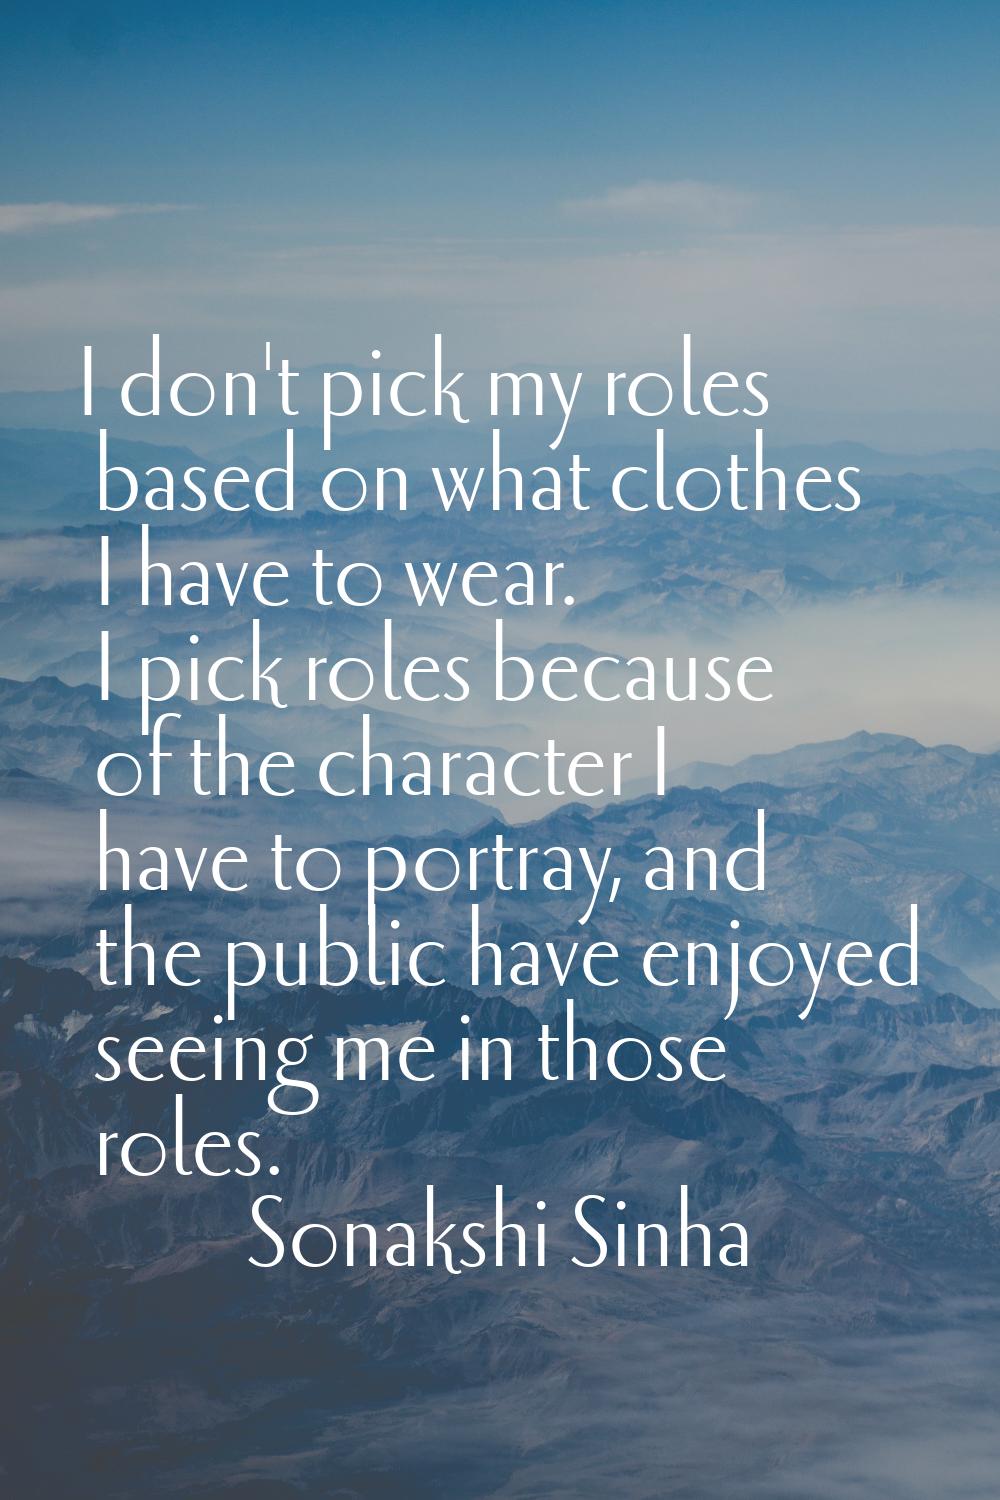 I don't pick my roles based on what clothes I have to wear. I pick roles because of the character I